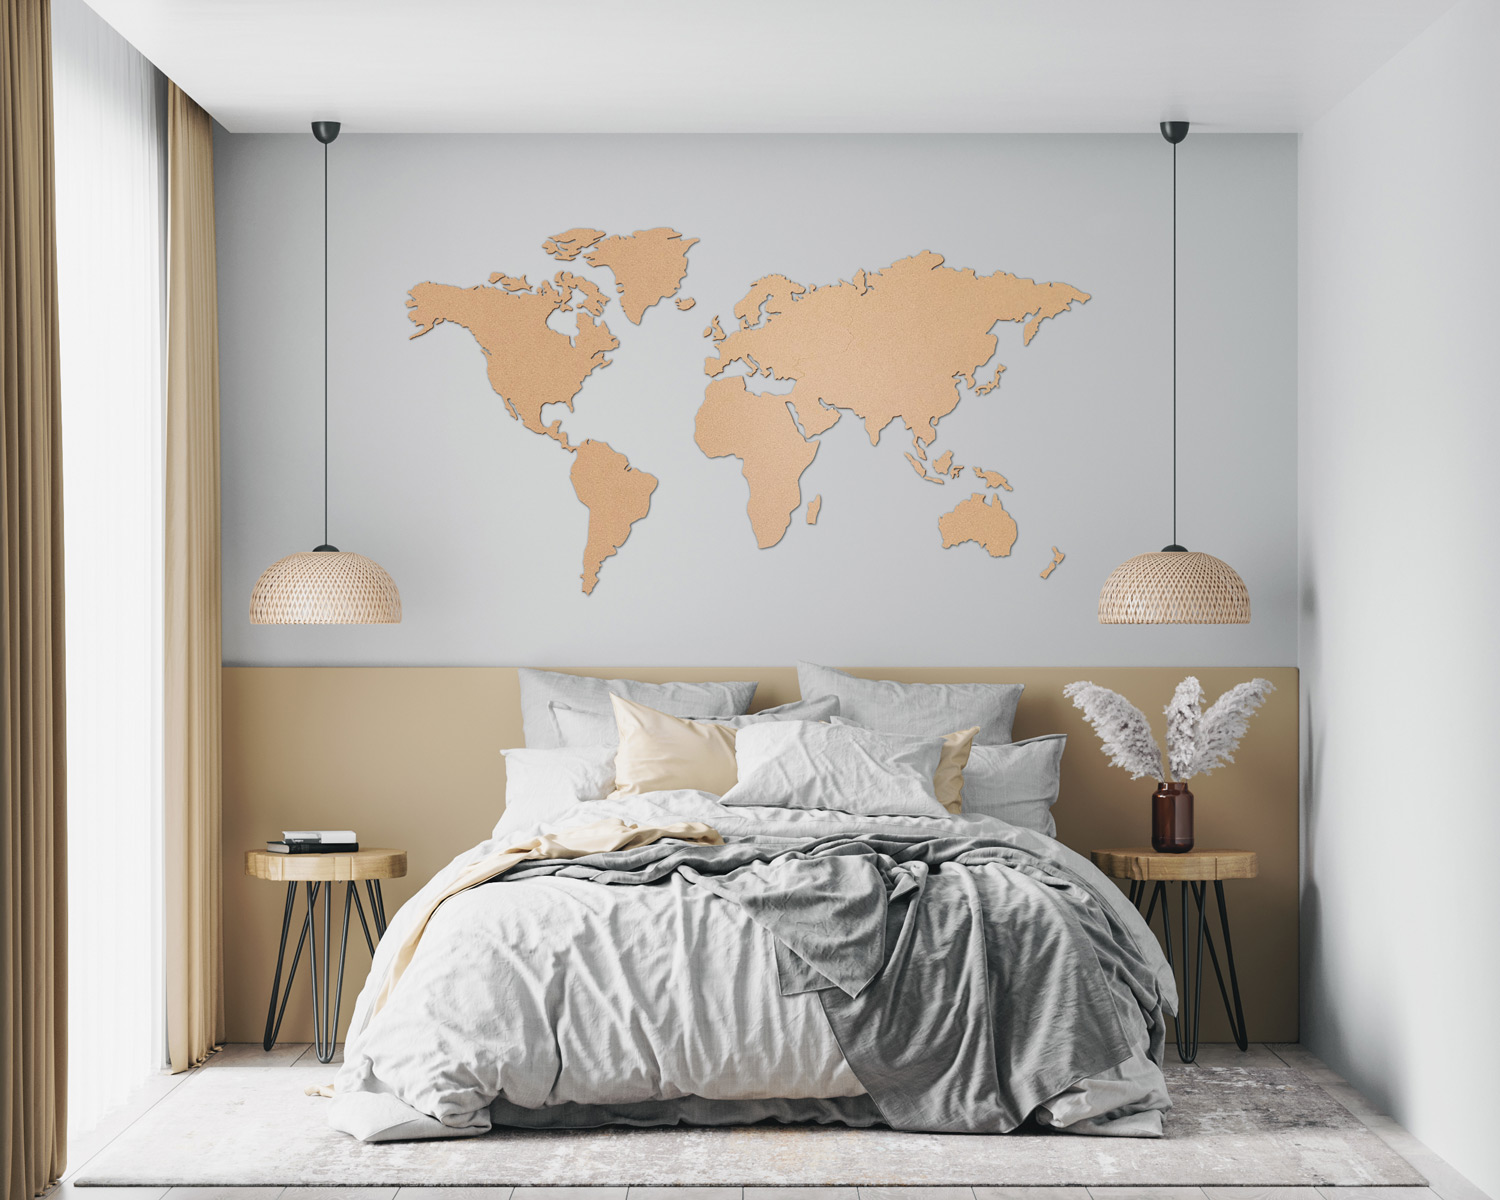 World map / cork puzzle - natural color, white printing